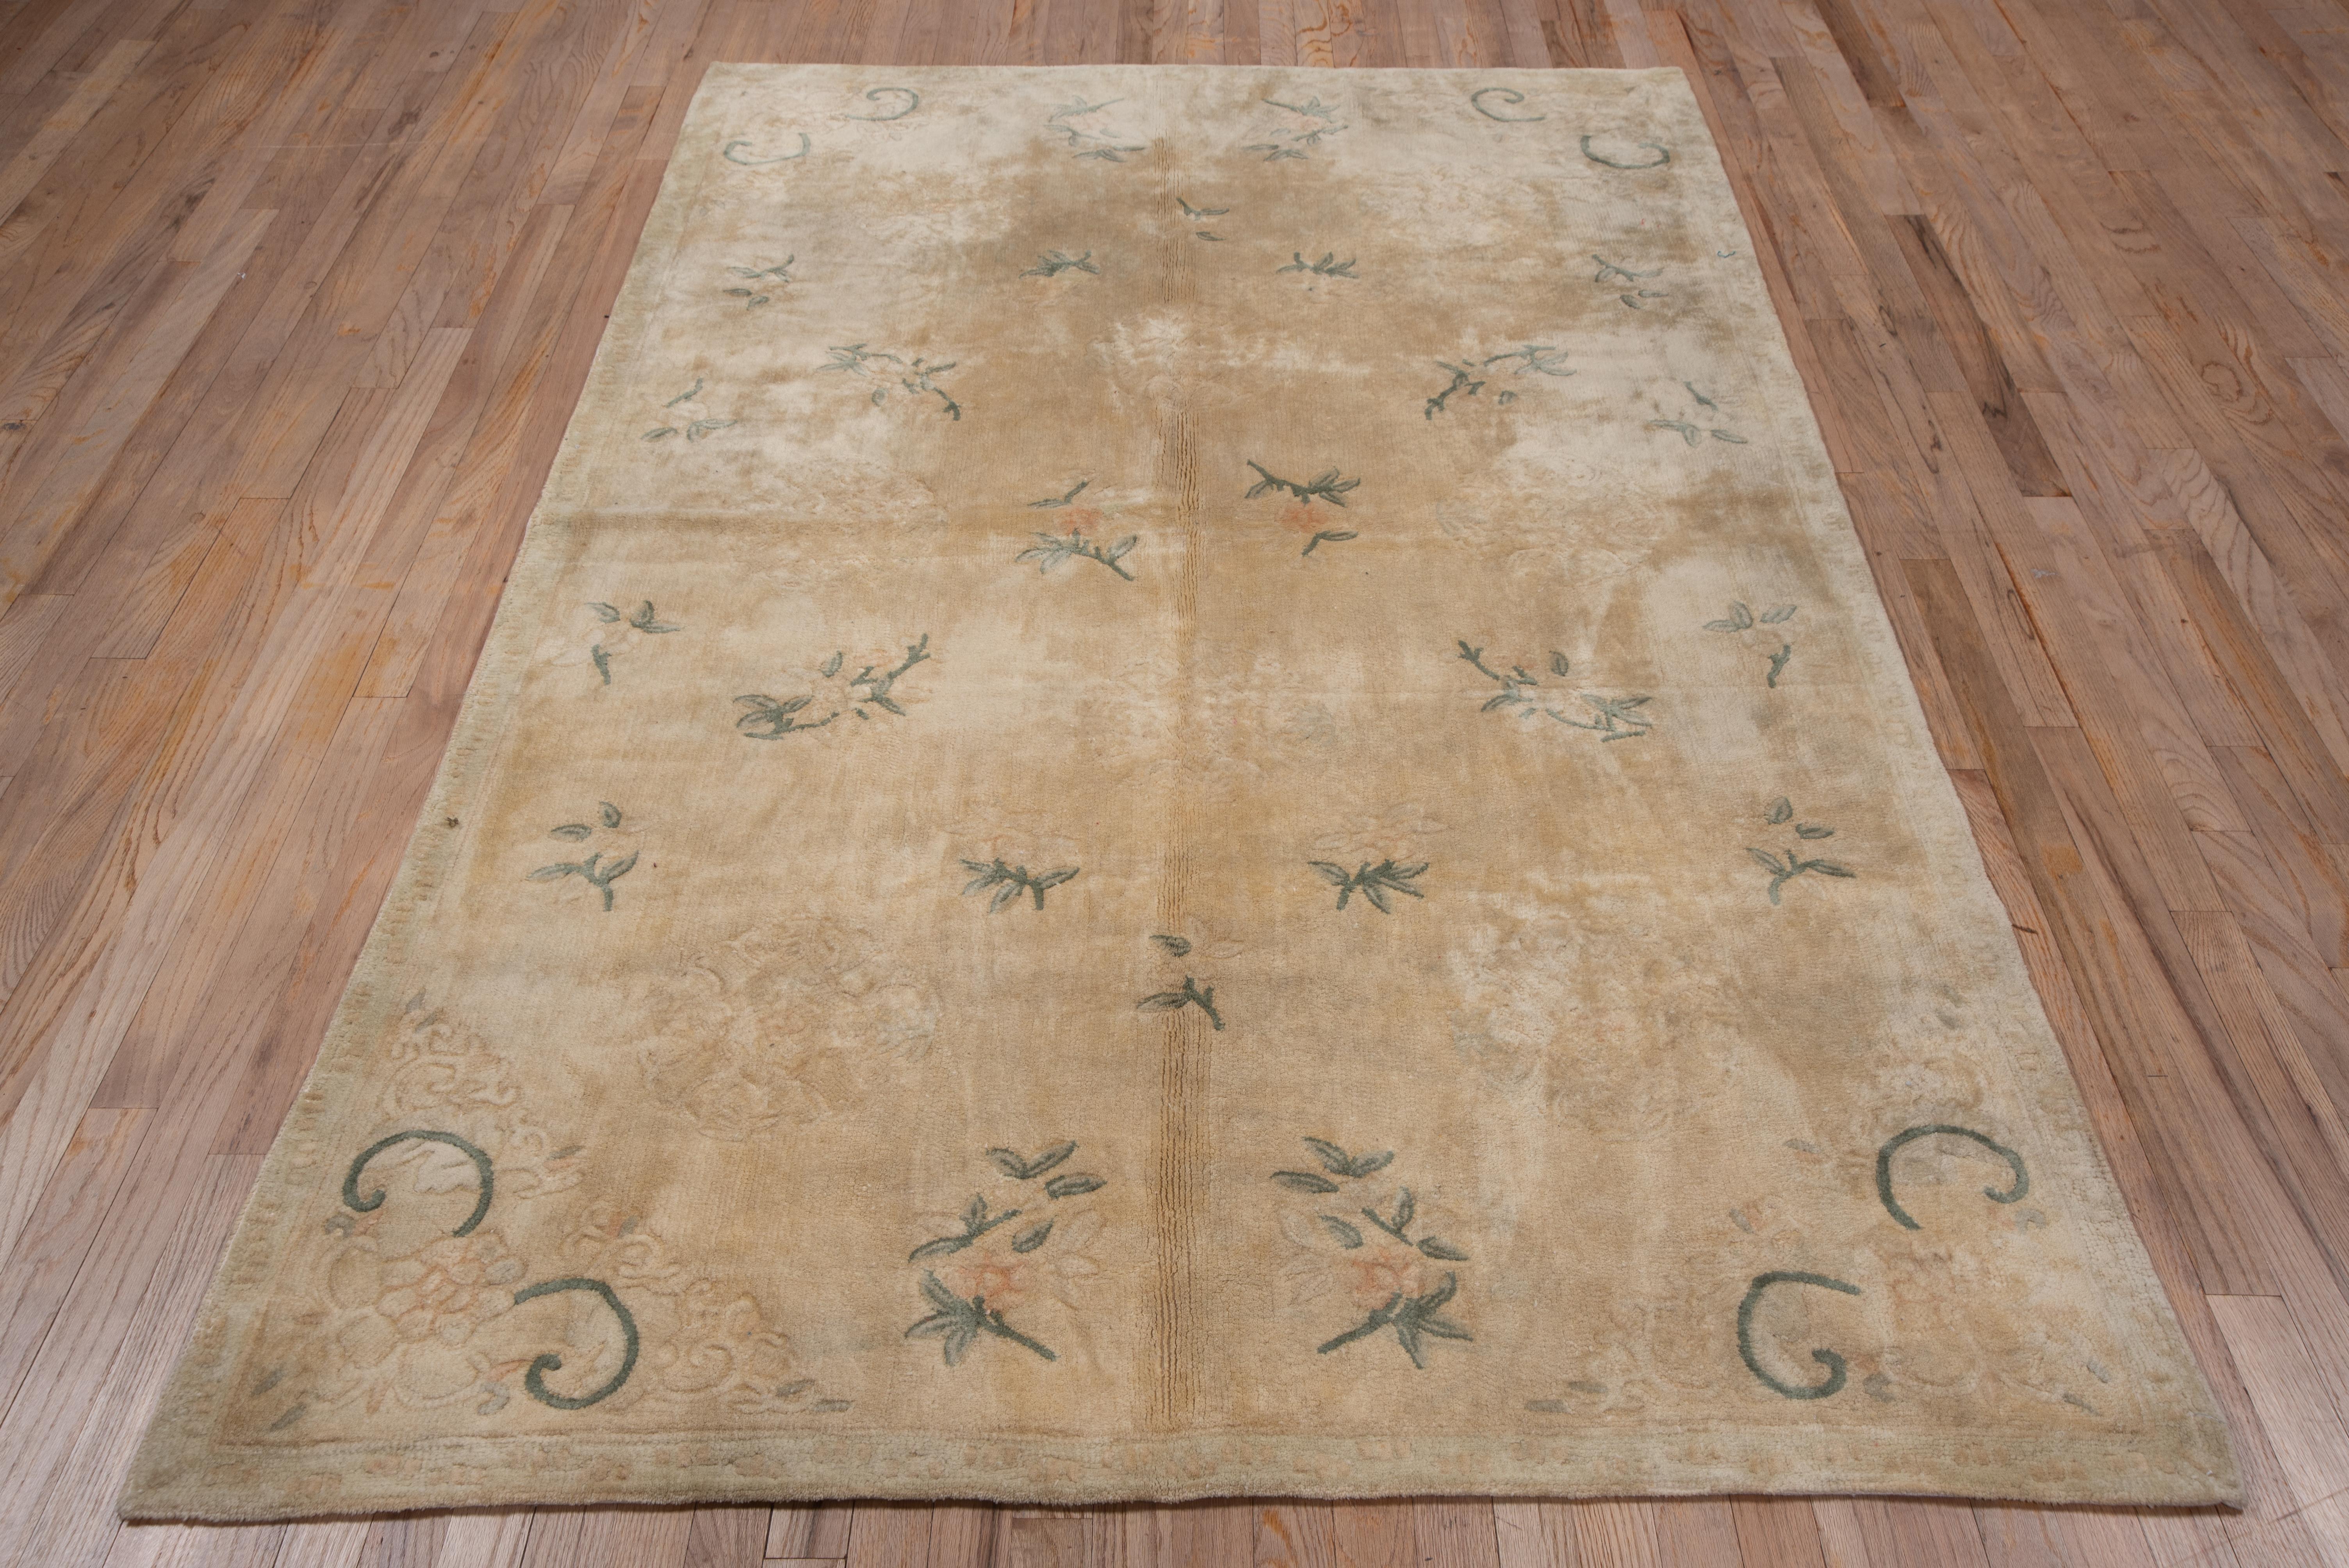 Antique Chinese Needlework Rug with Beige Field and Floral Design In Good Condition For Sale In New York, NY